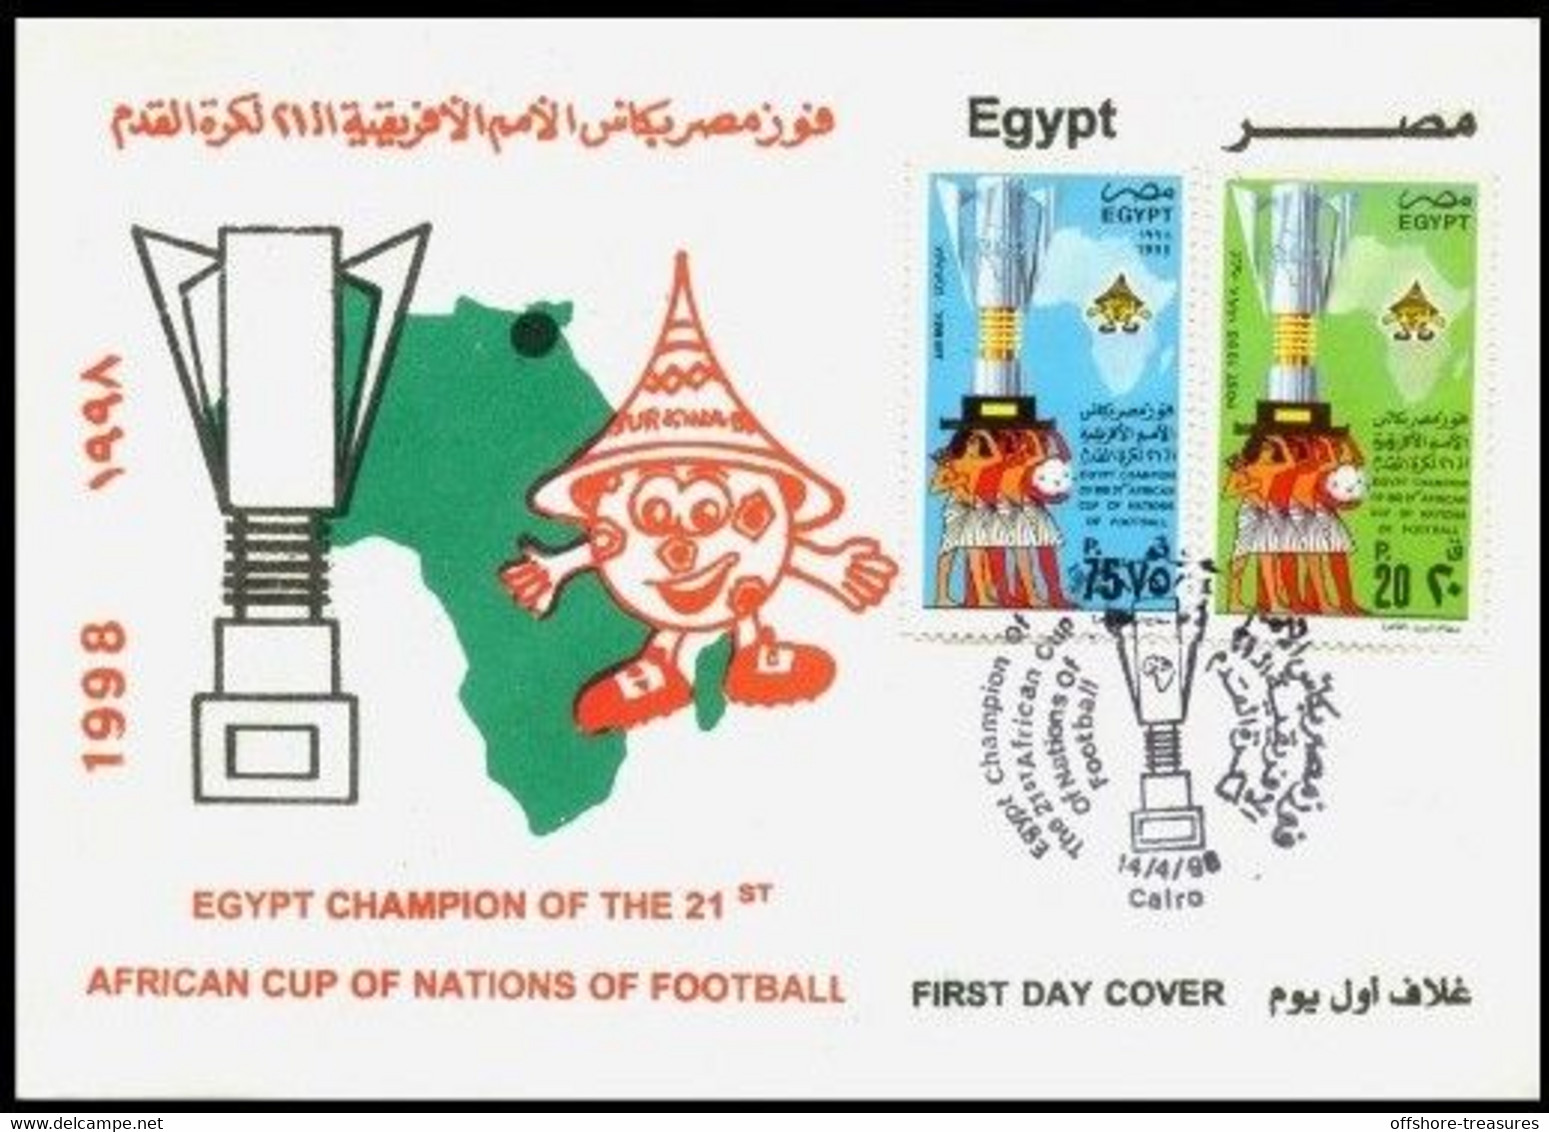 Egypt FOOTBALL WINNER 1998 First Day Cover - FDC 2 Stamps 75P & 20P AFRICAN NATIONS CUP BURKINA FASO - Briefe U. Dokumente